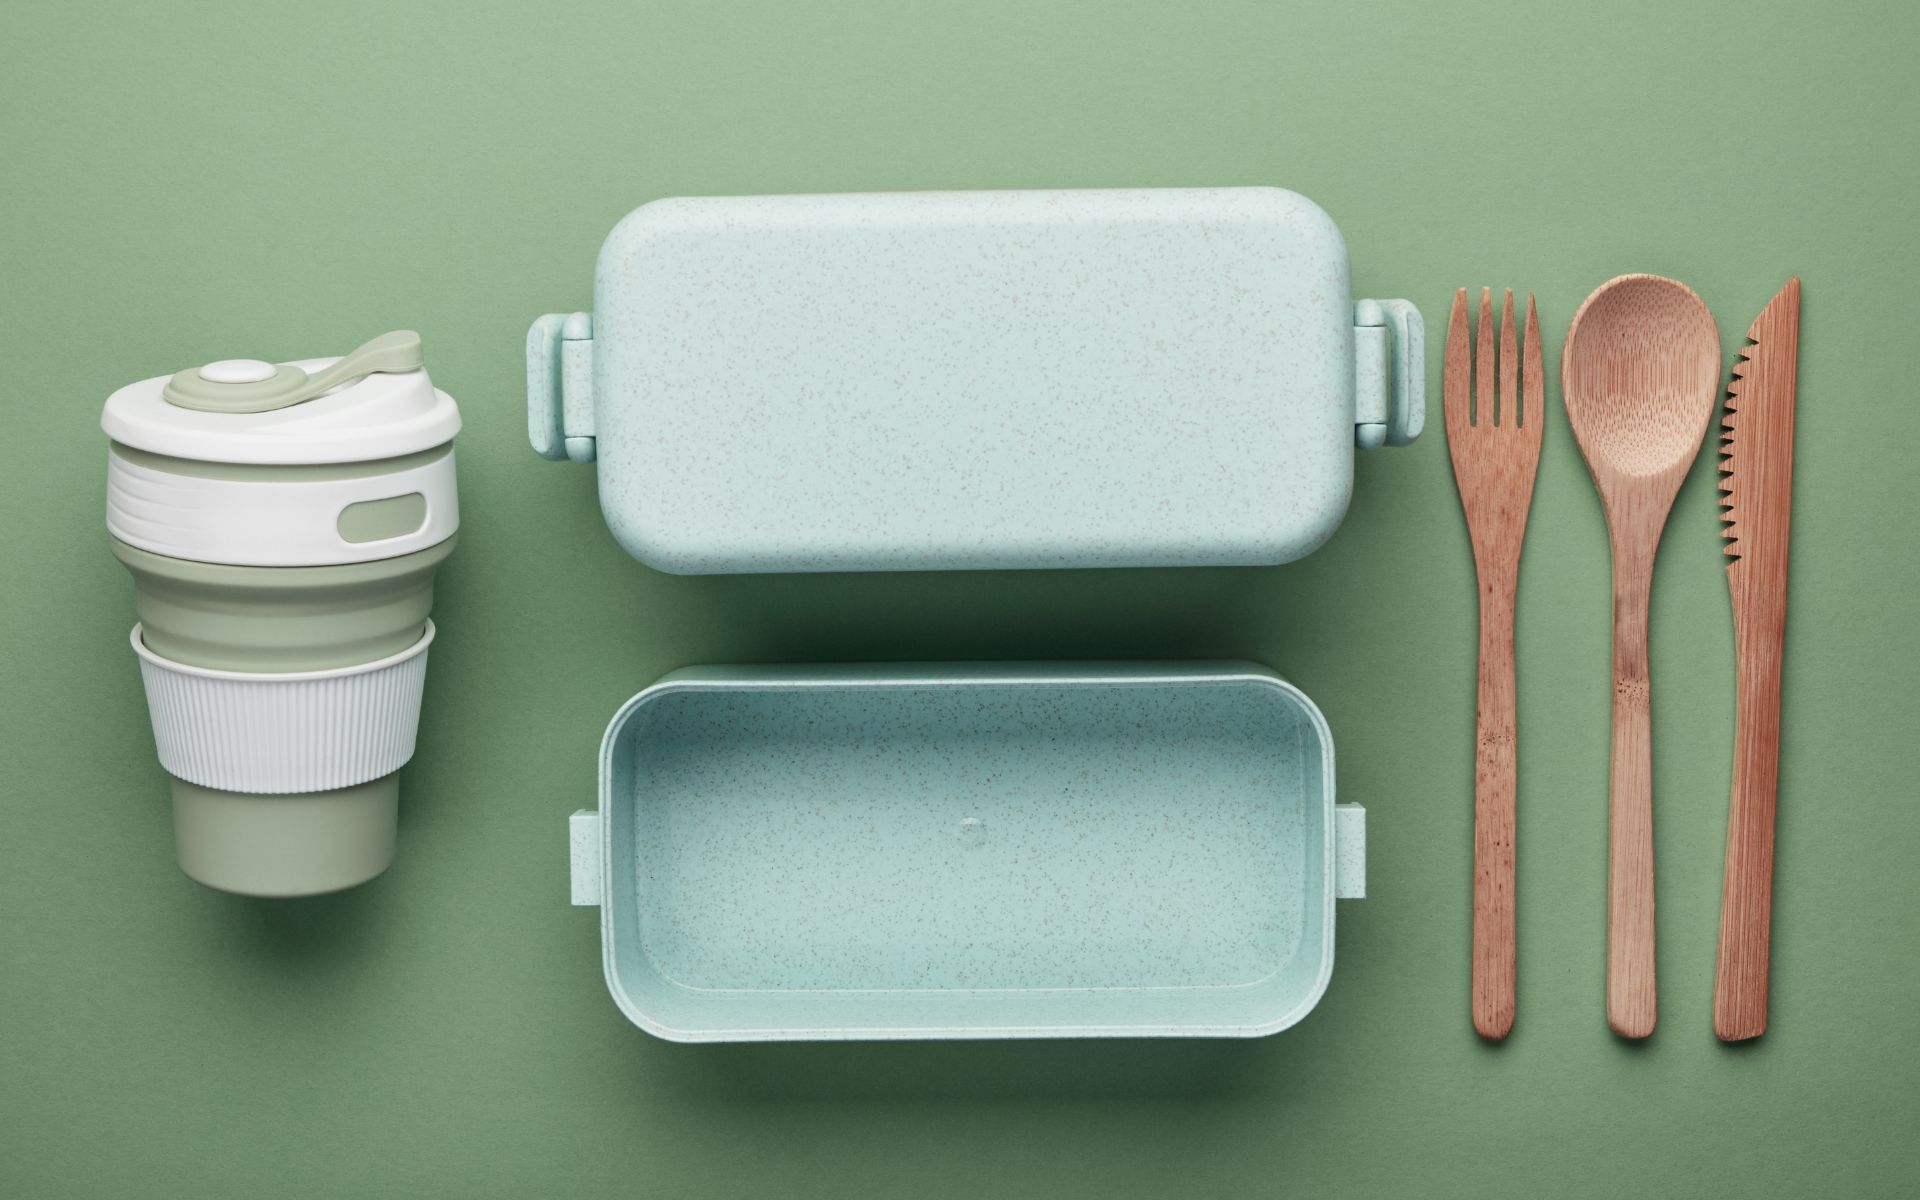 Bring Your Lunch in a Reusable Container Instead of Buying Takeout